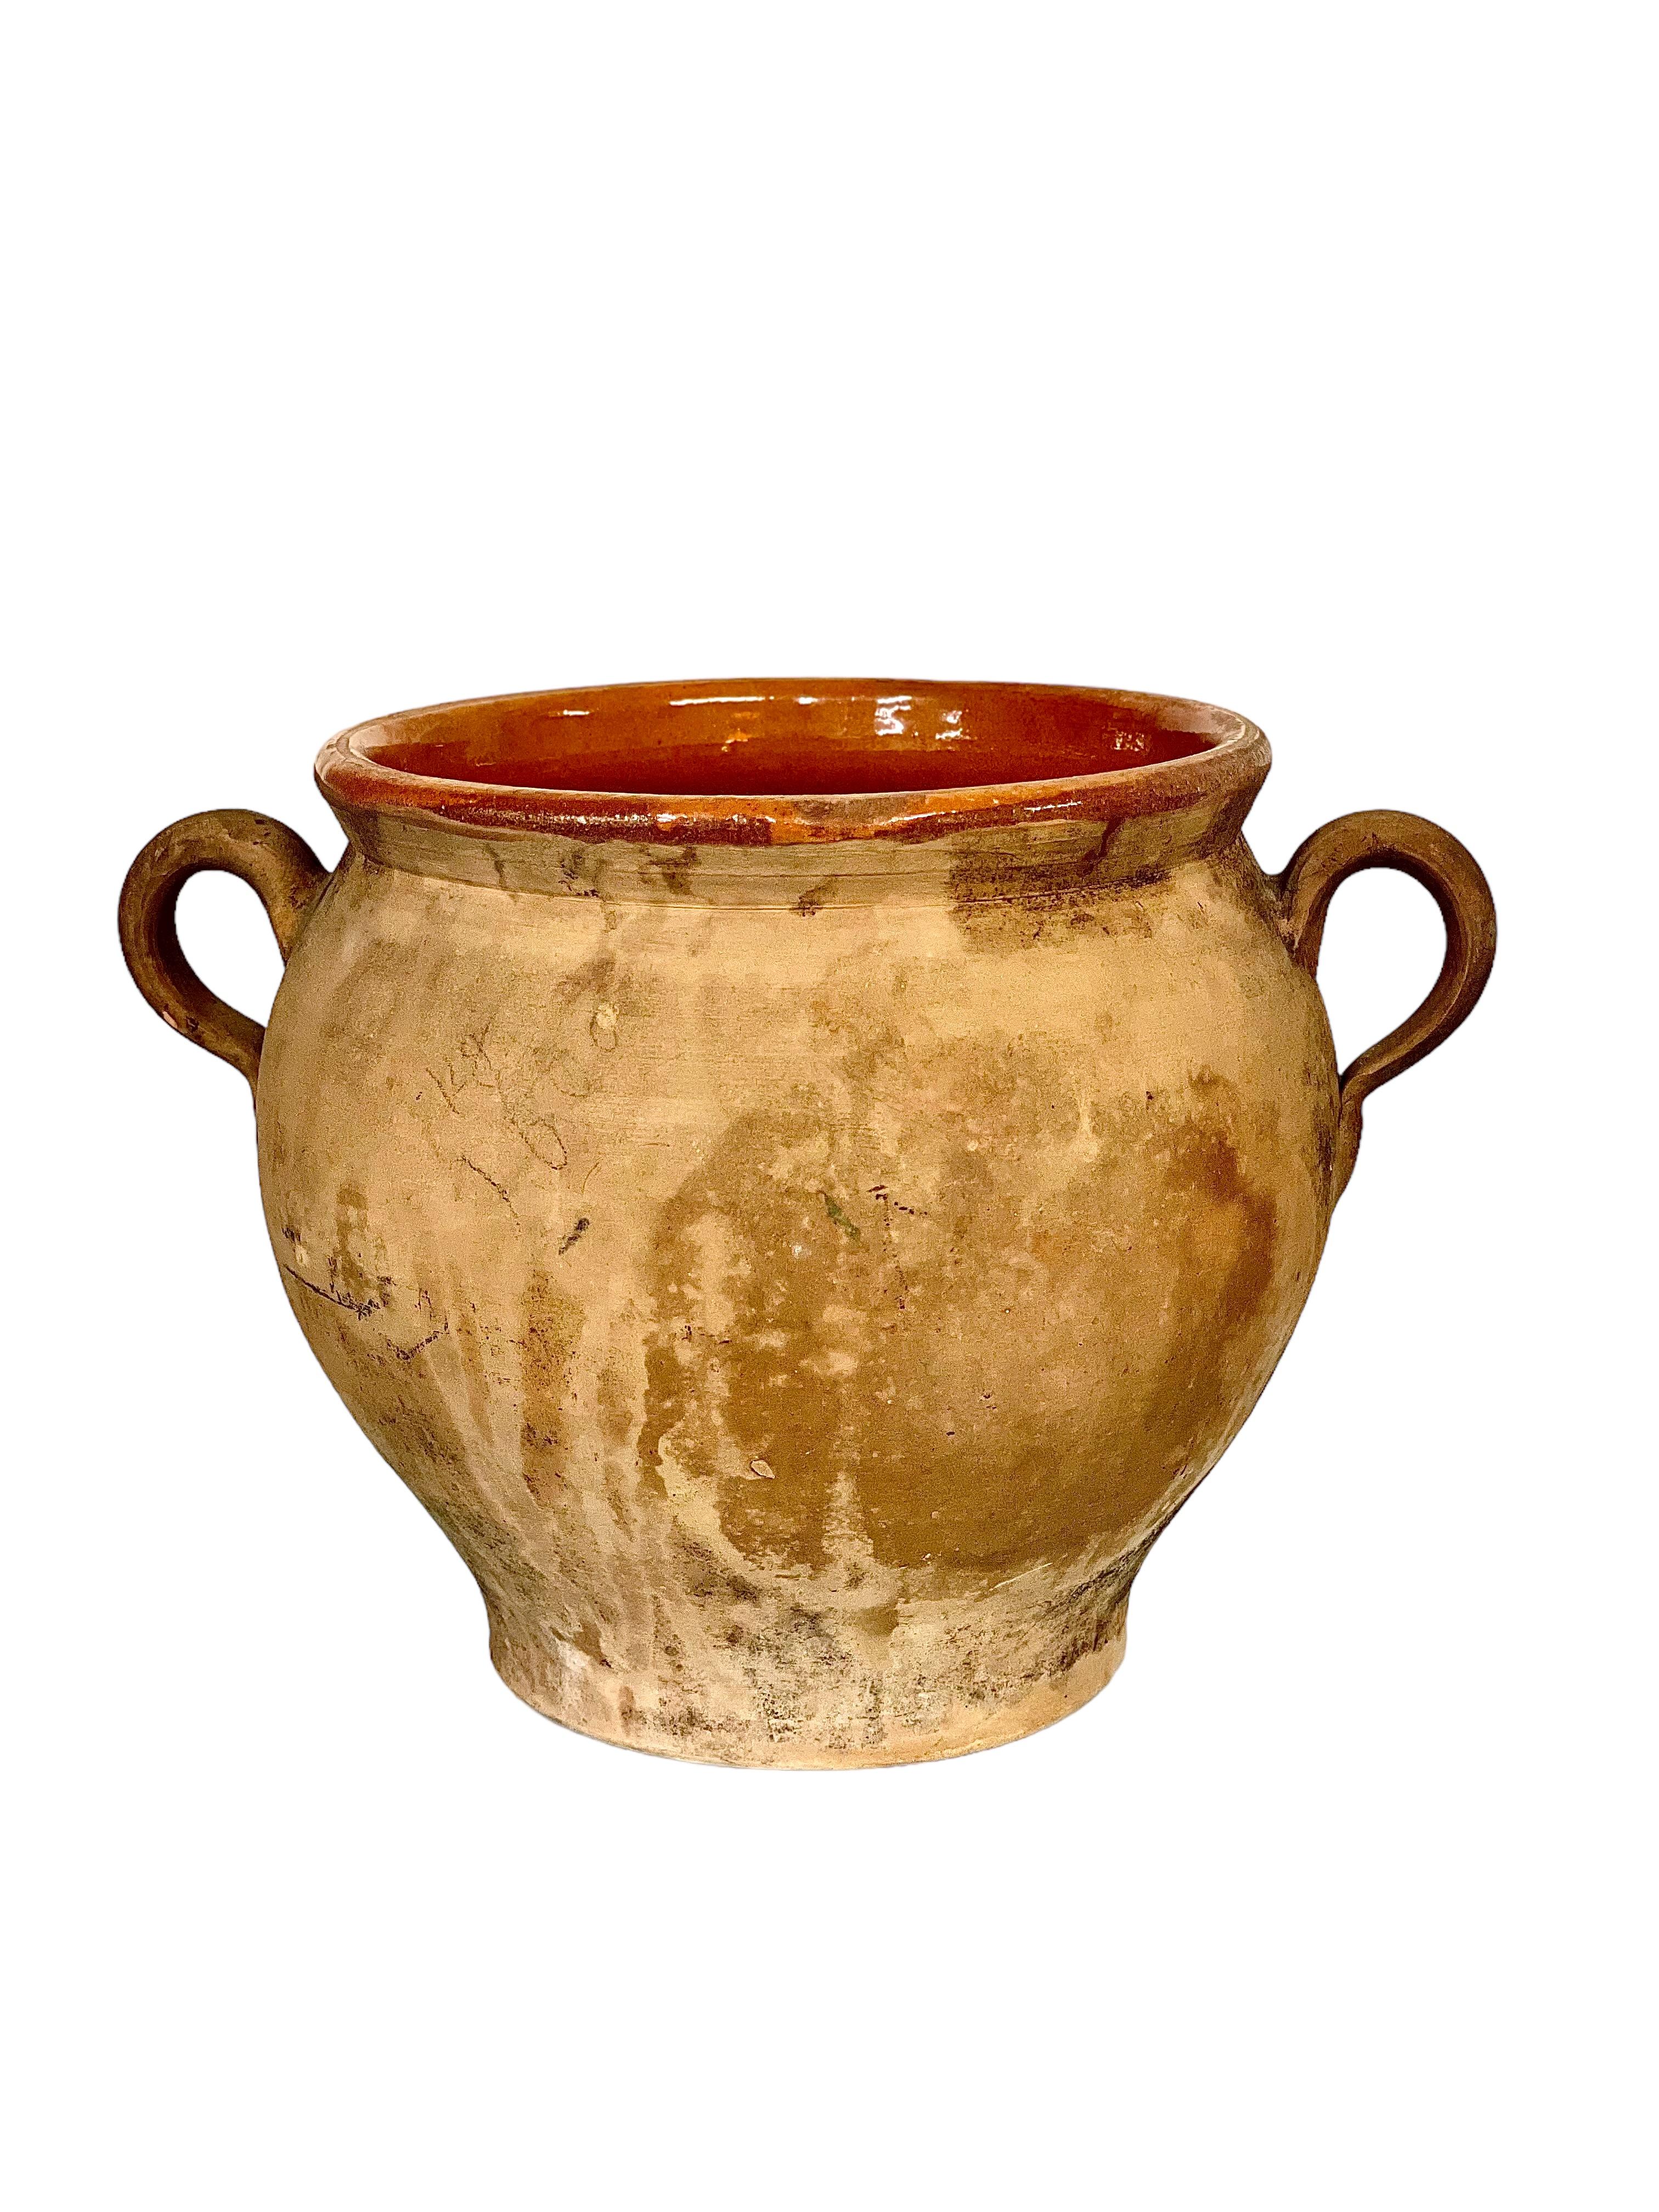 A charming terracotta 'Confit pot' with two side handles, glazed internally and full of character thanks to its authentic, time-worn patina. Once used in a southern French kitchen for the preservation of foodstuffs before the days of refrigeration,